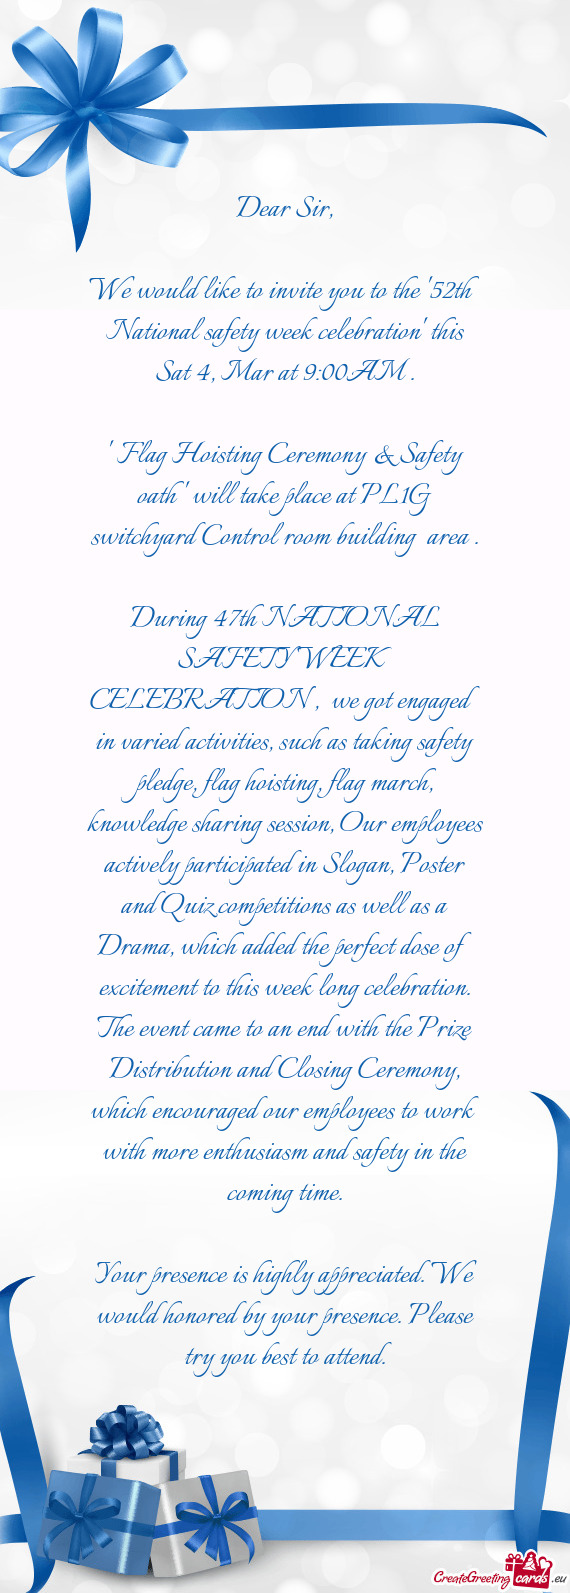 We would like to invite you to the "52th National safety week celebration" this Sat 4, Mar at 9:00AM